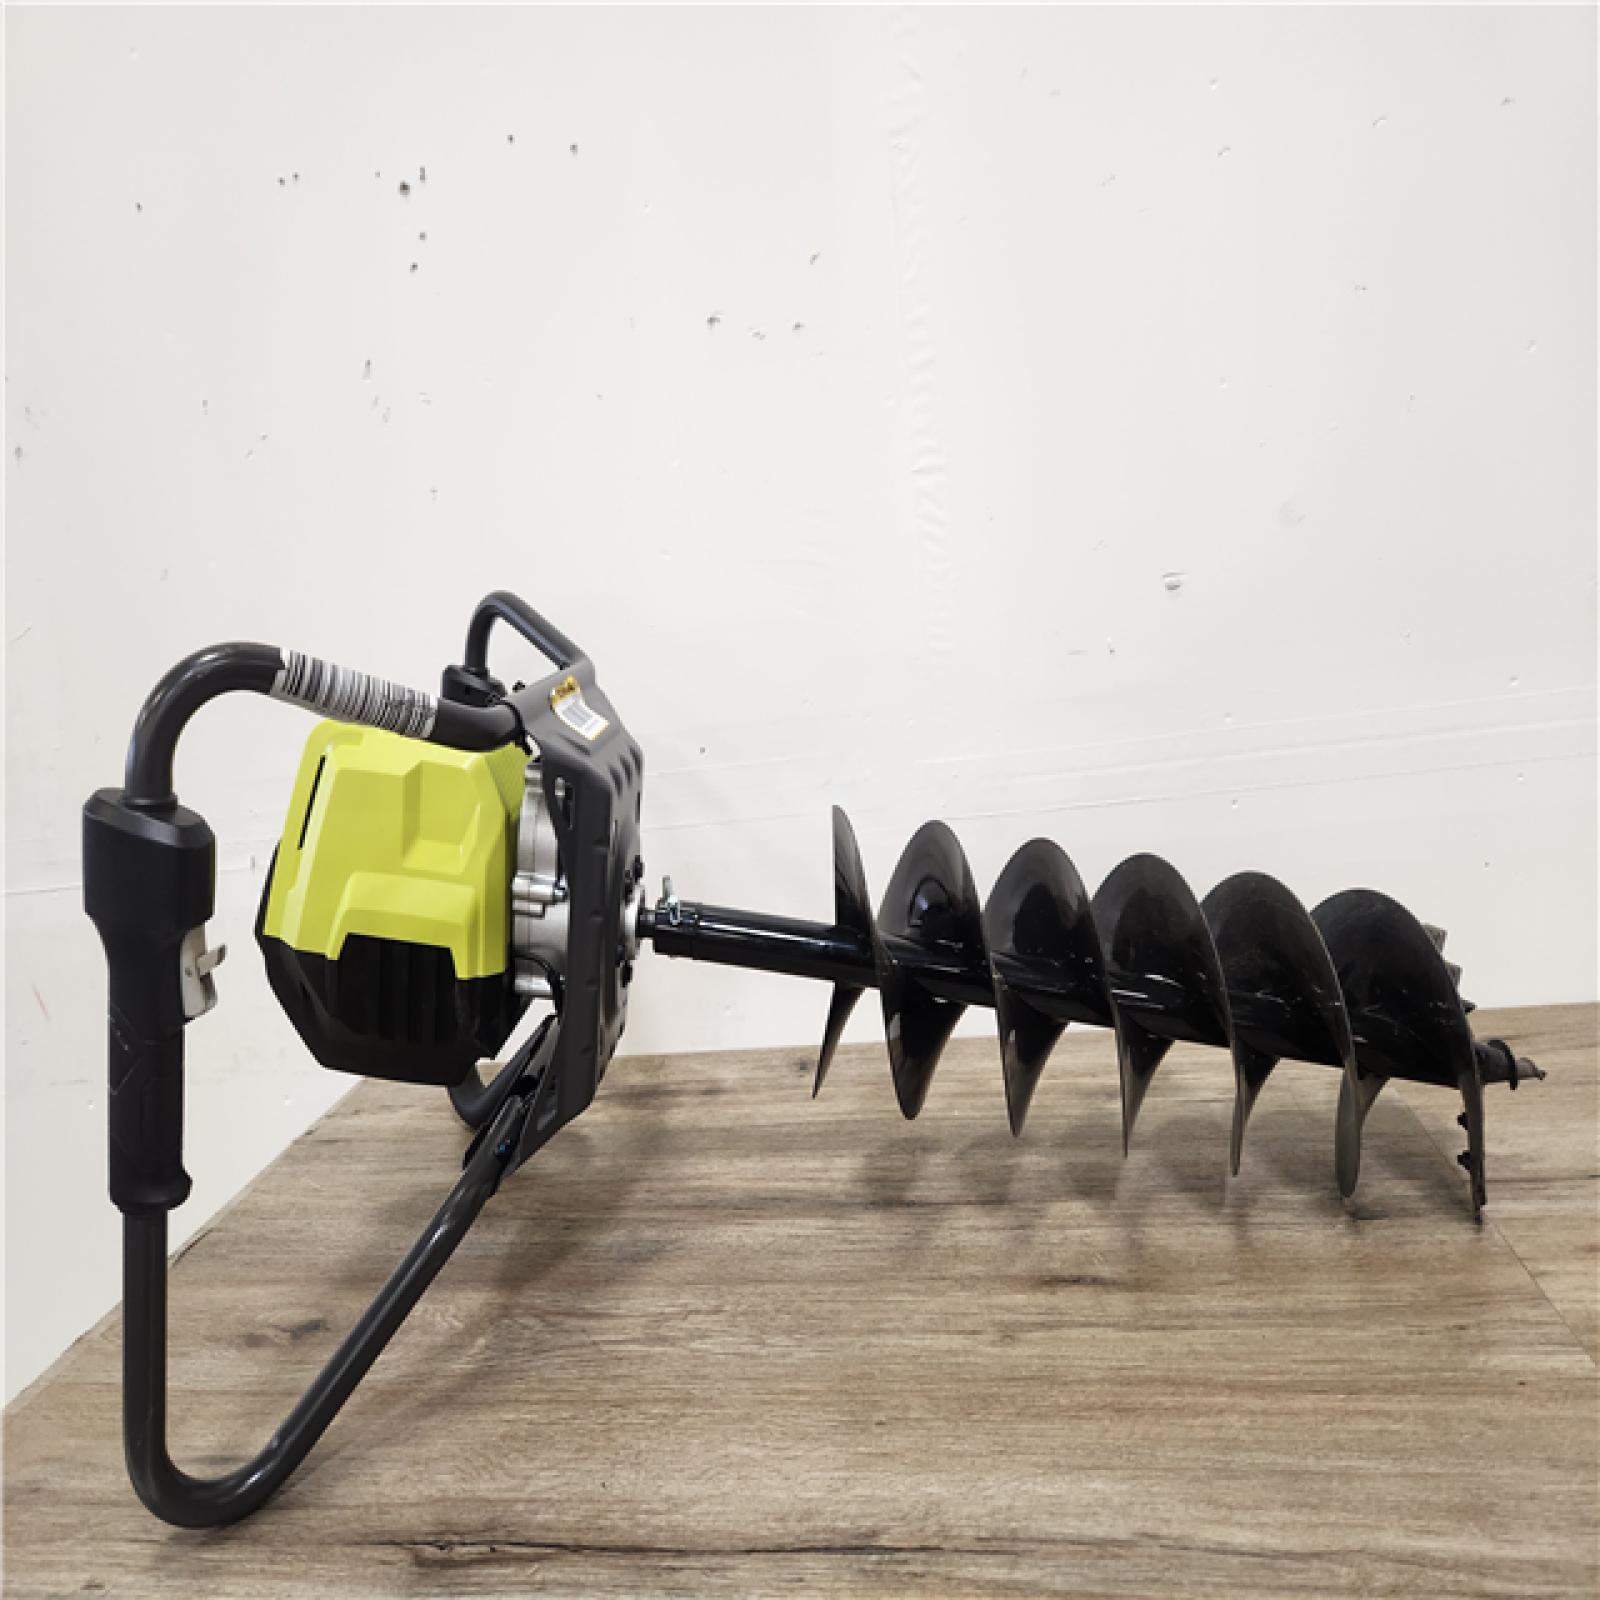 Phoenix Location LIKE NEW RYOBI 40V HP Brushless Cordless Earth Auger Powerhead with 8 in. Bit (Tool Only)